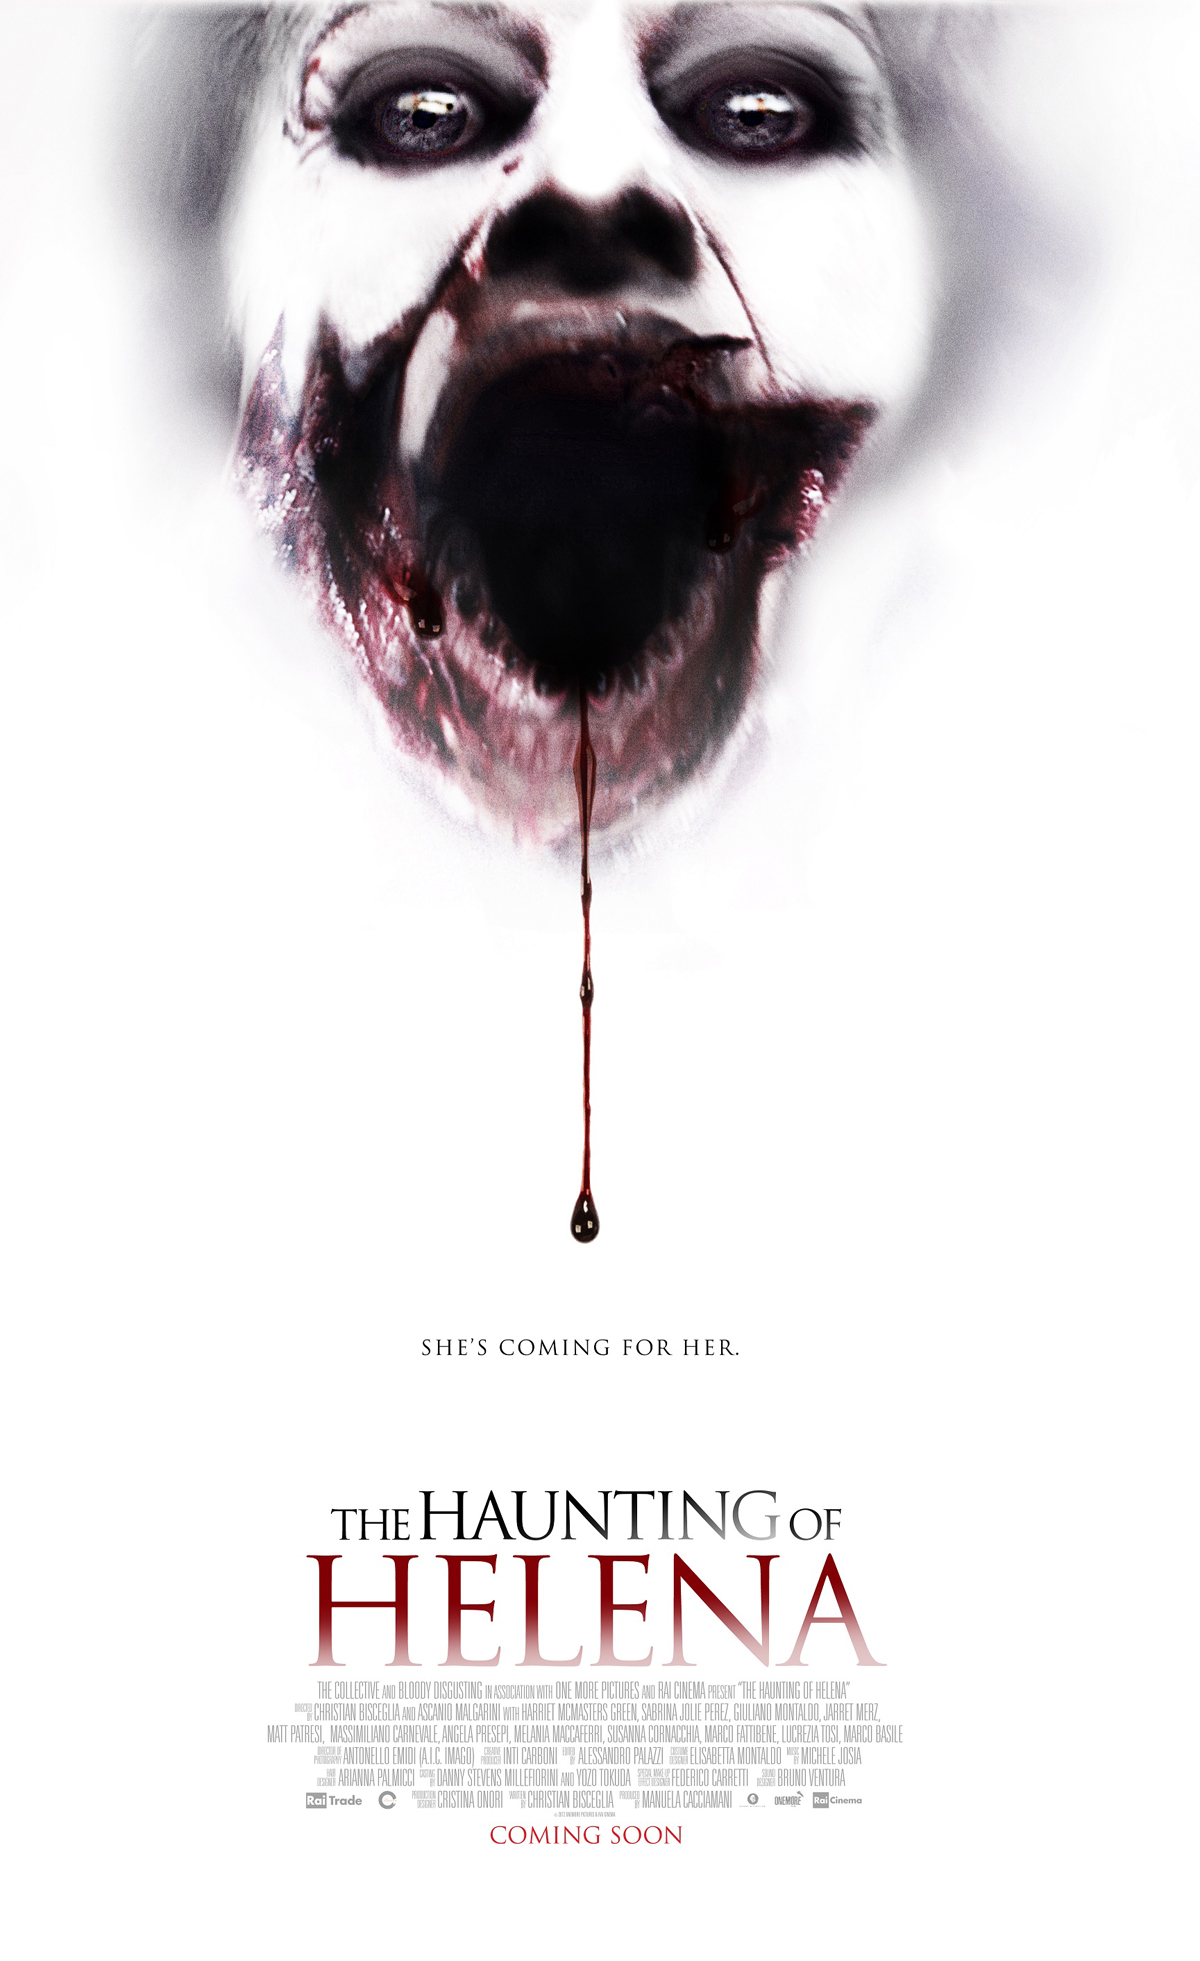 The-Haunting-of-Helena-Theatrical-Poster1